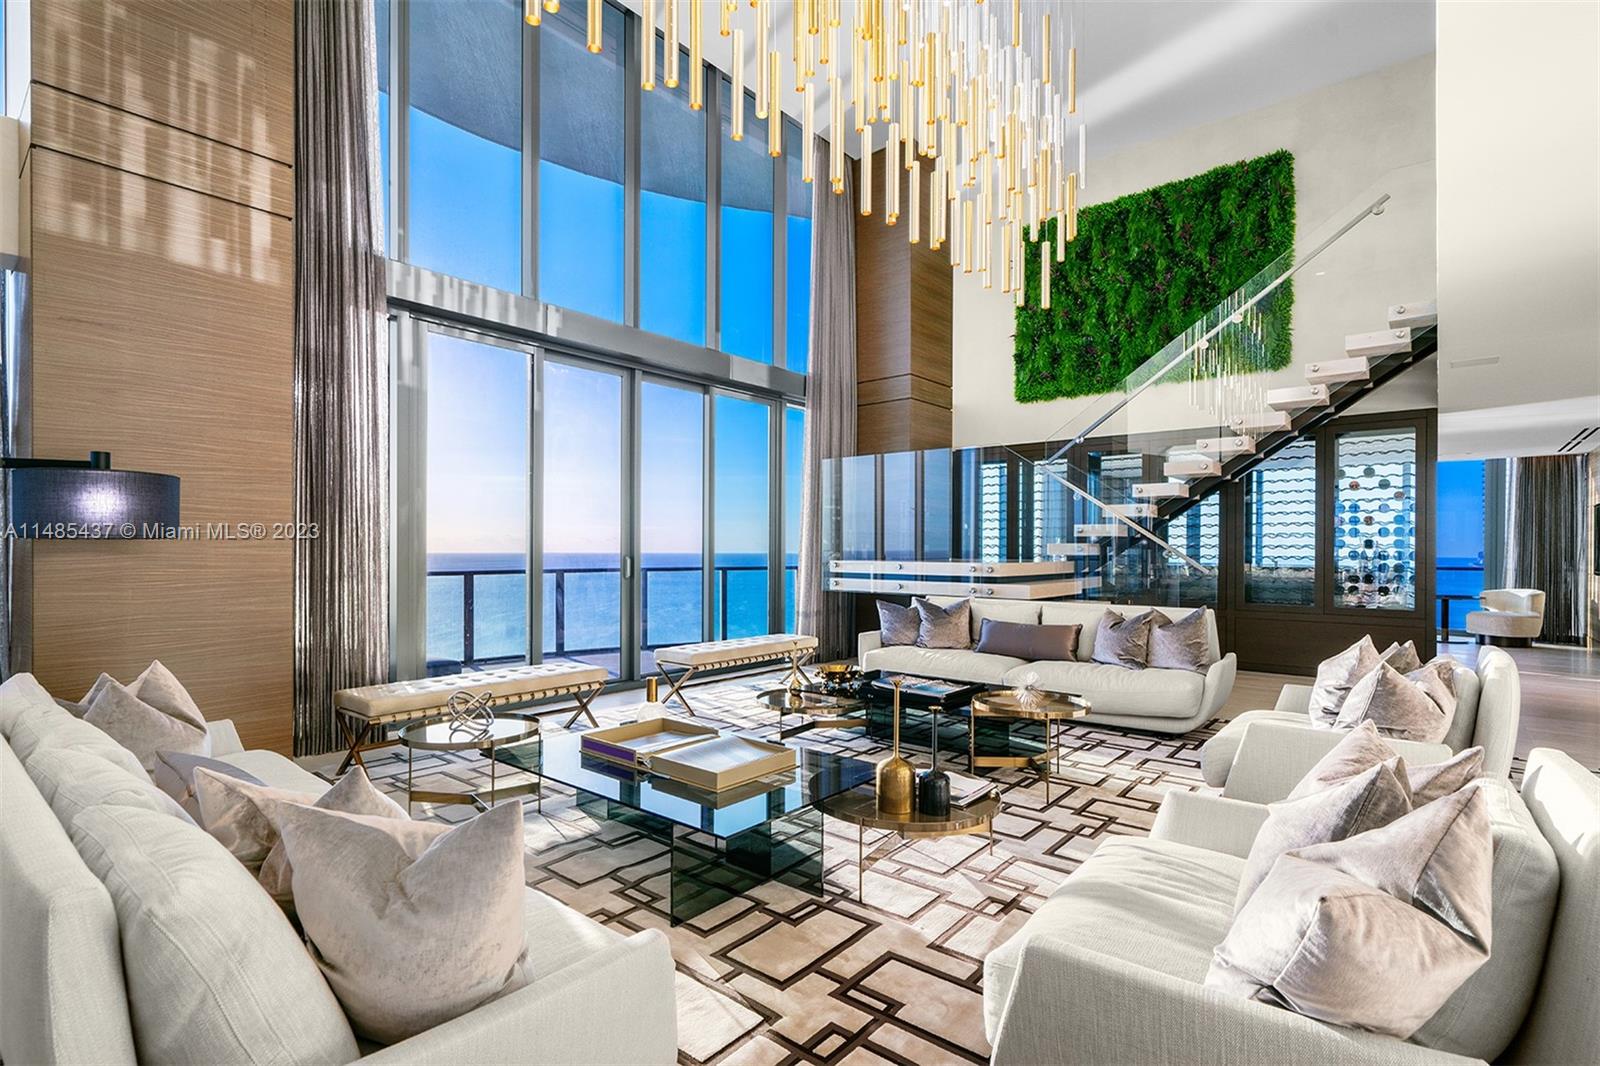 Introducing the Regalia Penthouse, a masterpiece offering limited edition living on the Ocean in Sunny Isles Beach. Encompassing 10,755 SF of living space, this residence is furnished with the world's finest materials where quality & style define the interiors. With a private pool & 2 levels of unobstructed panoramic views, including the Atlantic Ocean, pristine beaches, Intracoastal Waterway & Miami Beach skylines. This home in the sky features a stunning European kitchen with chef island & Miele cooktop, a 500-bottle wine cellar, private movie theatre, and an all marble spa like expansive primary bathroom with two stunning showers and best in class finishes. Enjoy sunrise & sunsets from this elegant residence, the last oceanfront parcel in Sunny Isles.